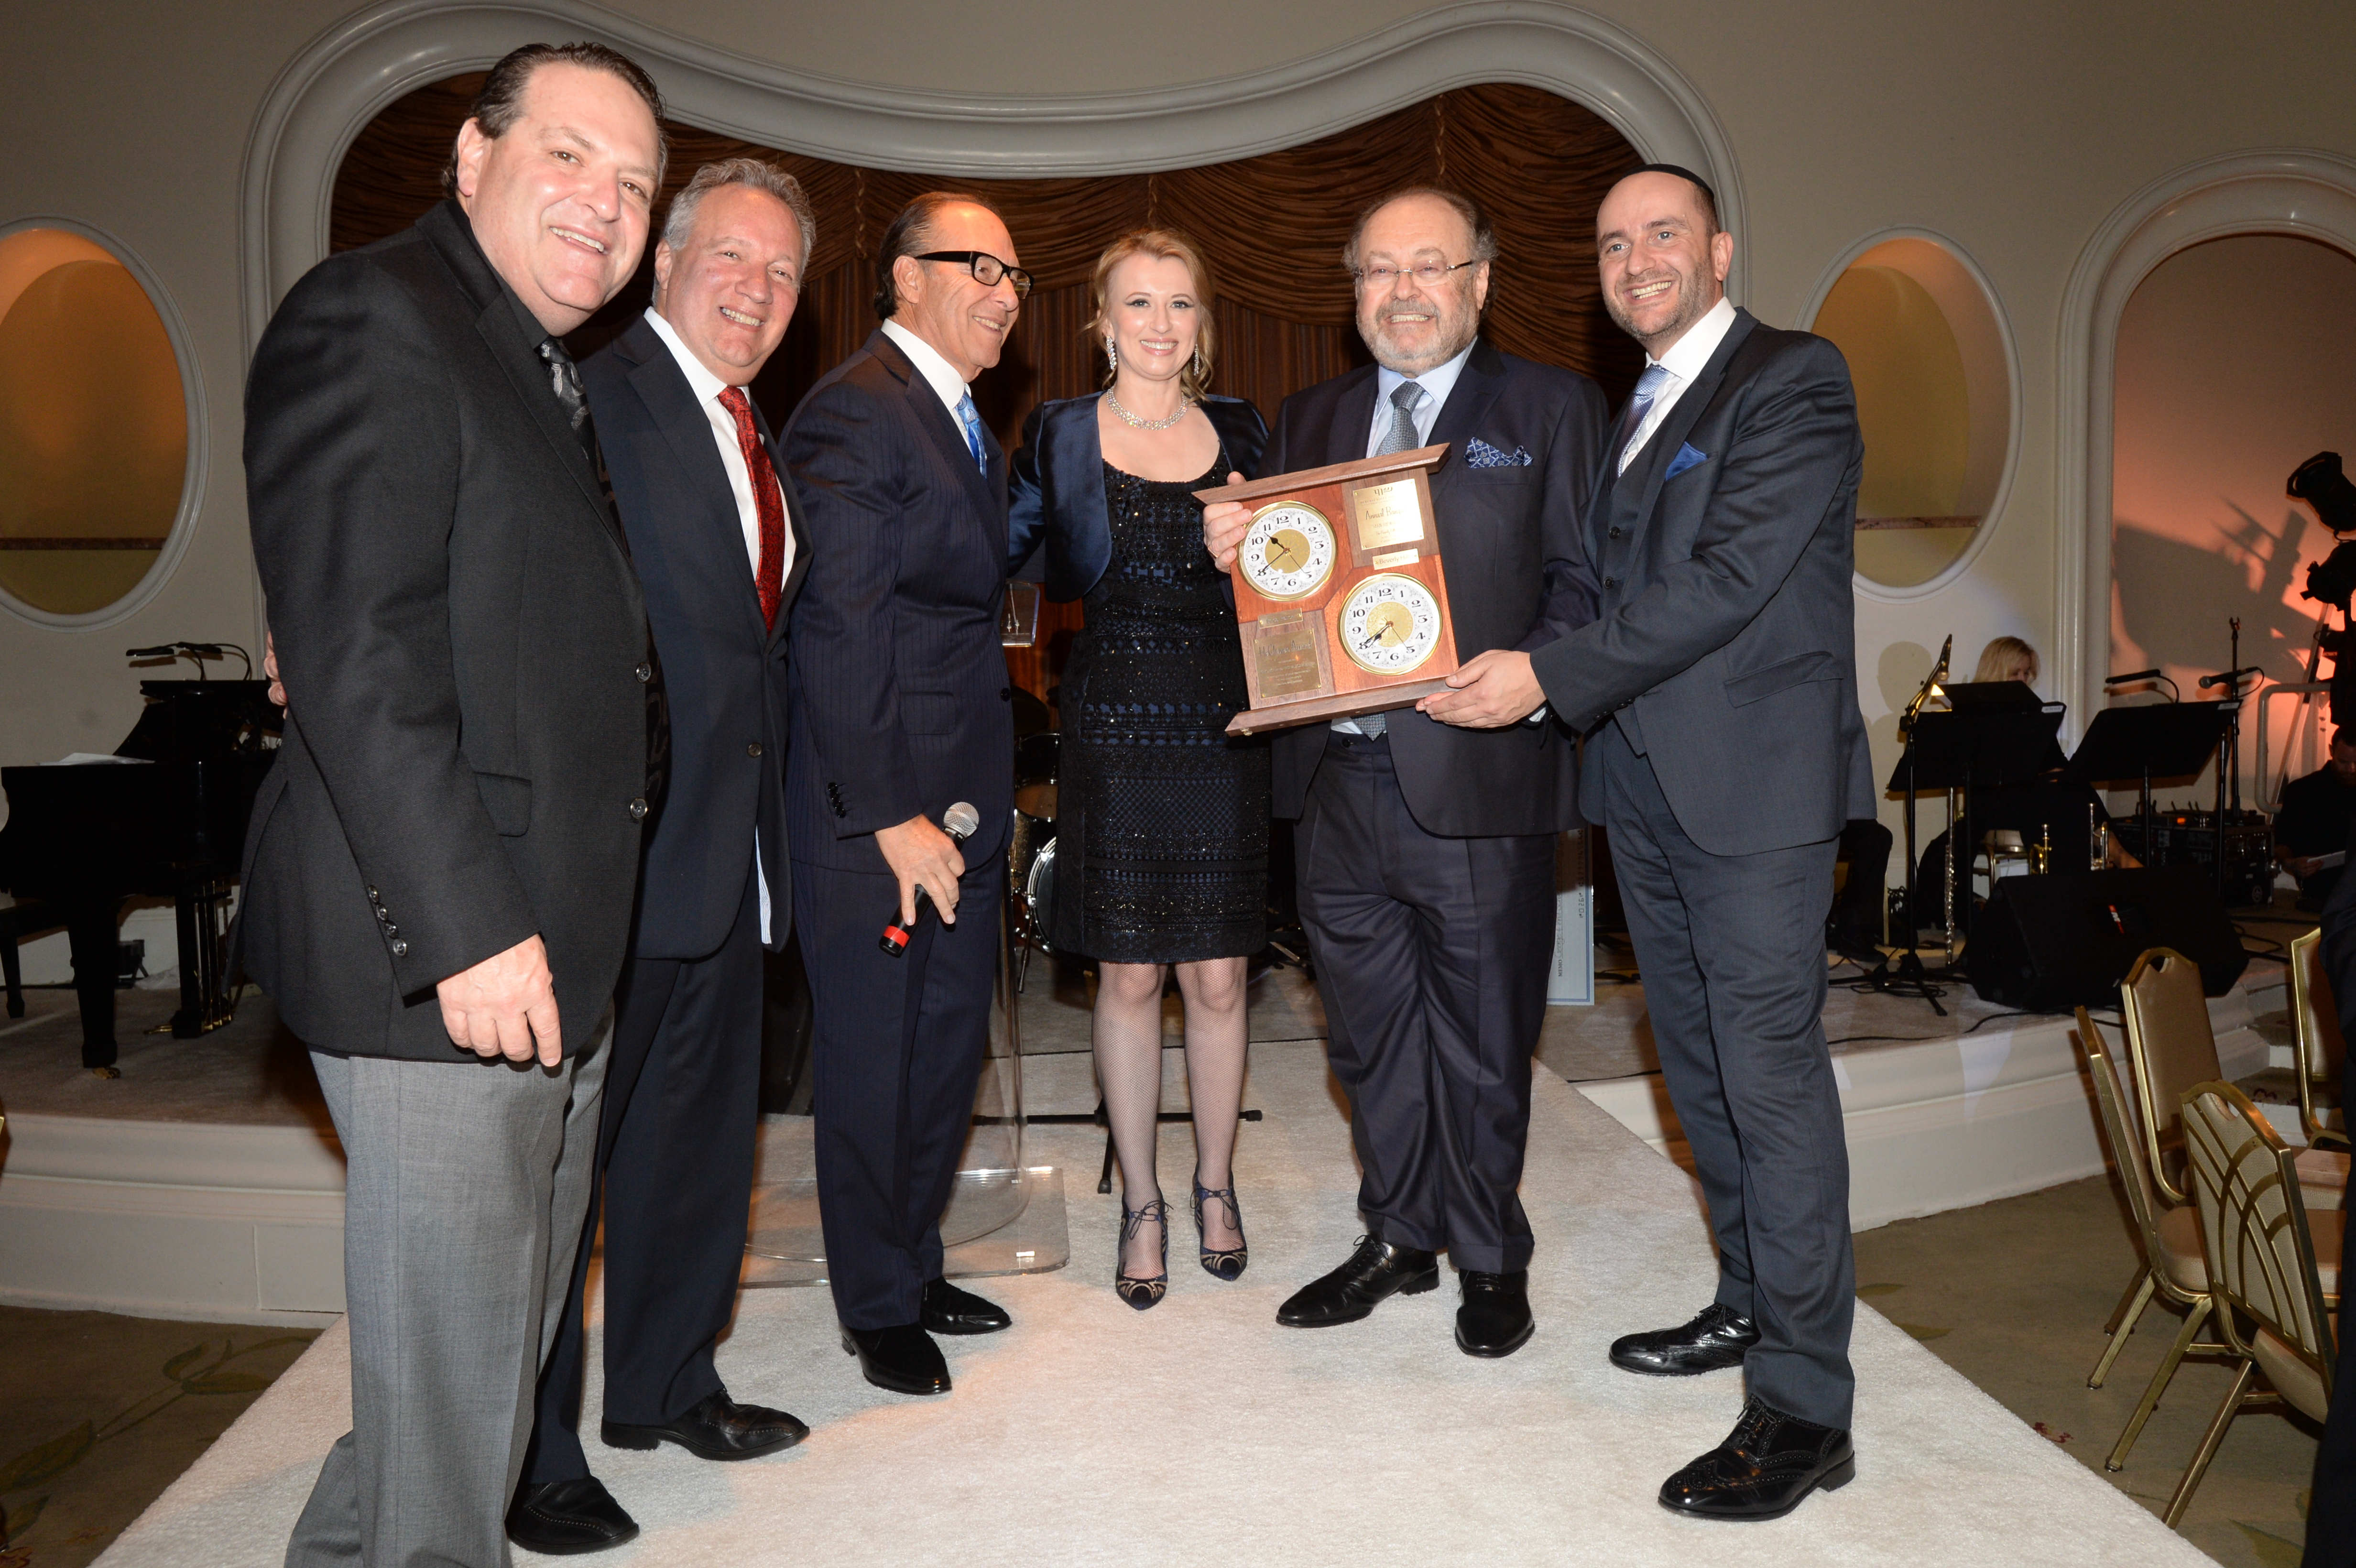 Beverly Hills Synagogue Annual Gala honoring Irena and George Schaefer, Beverly Hills Hotel (03/26/17)